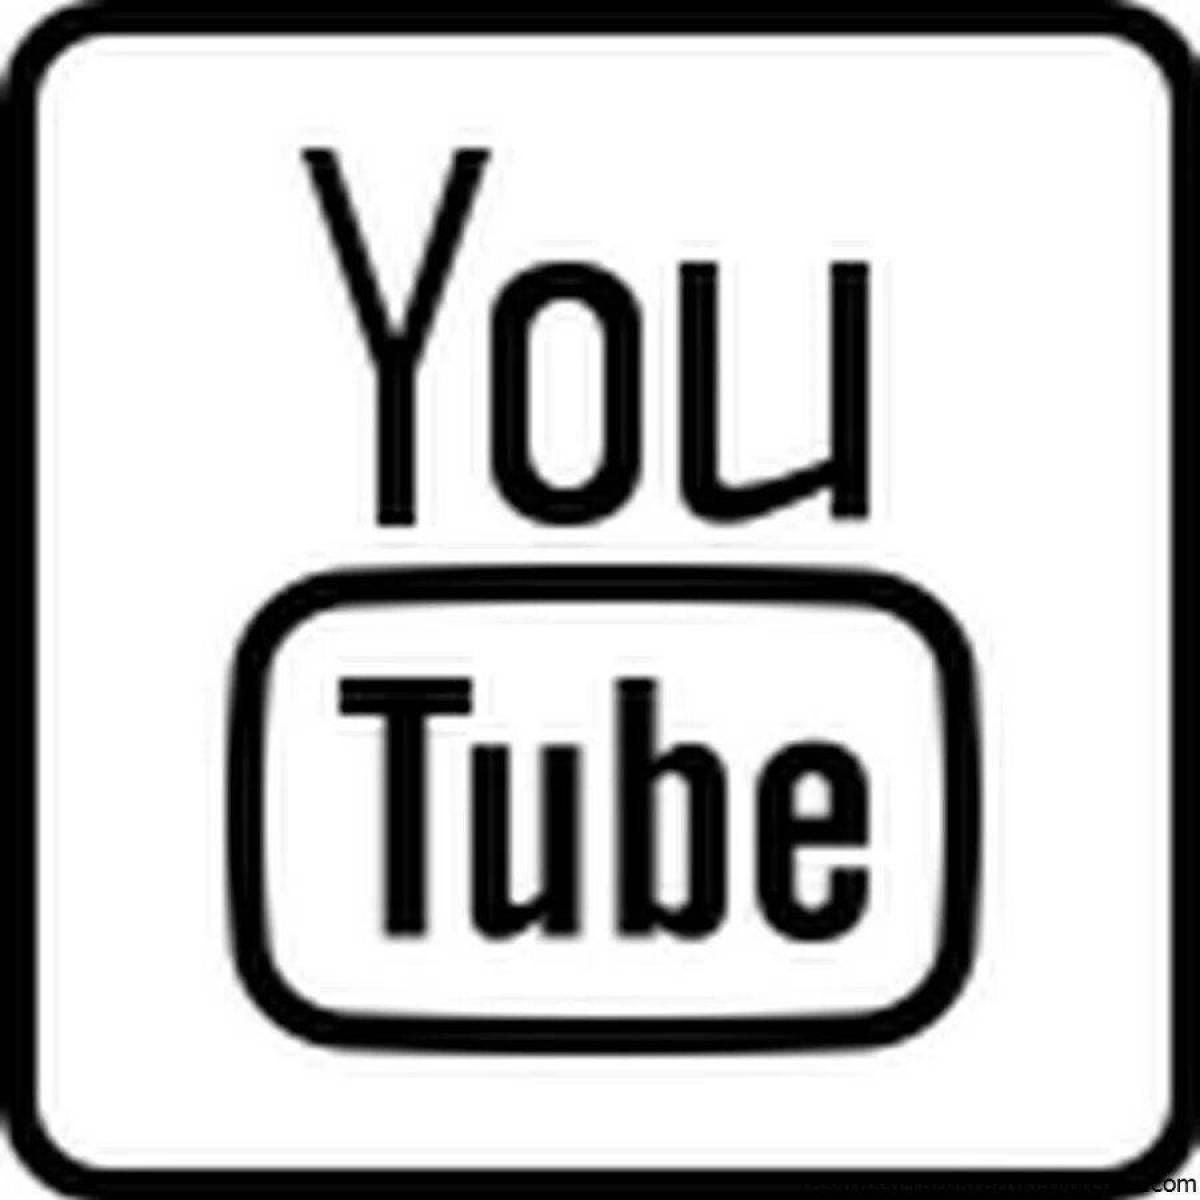 Coloring page with attractive youtube logo